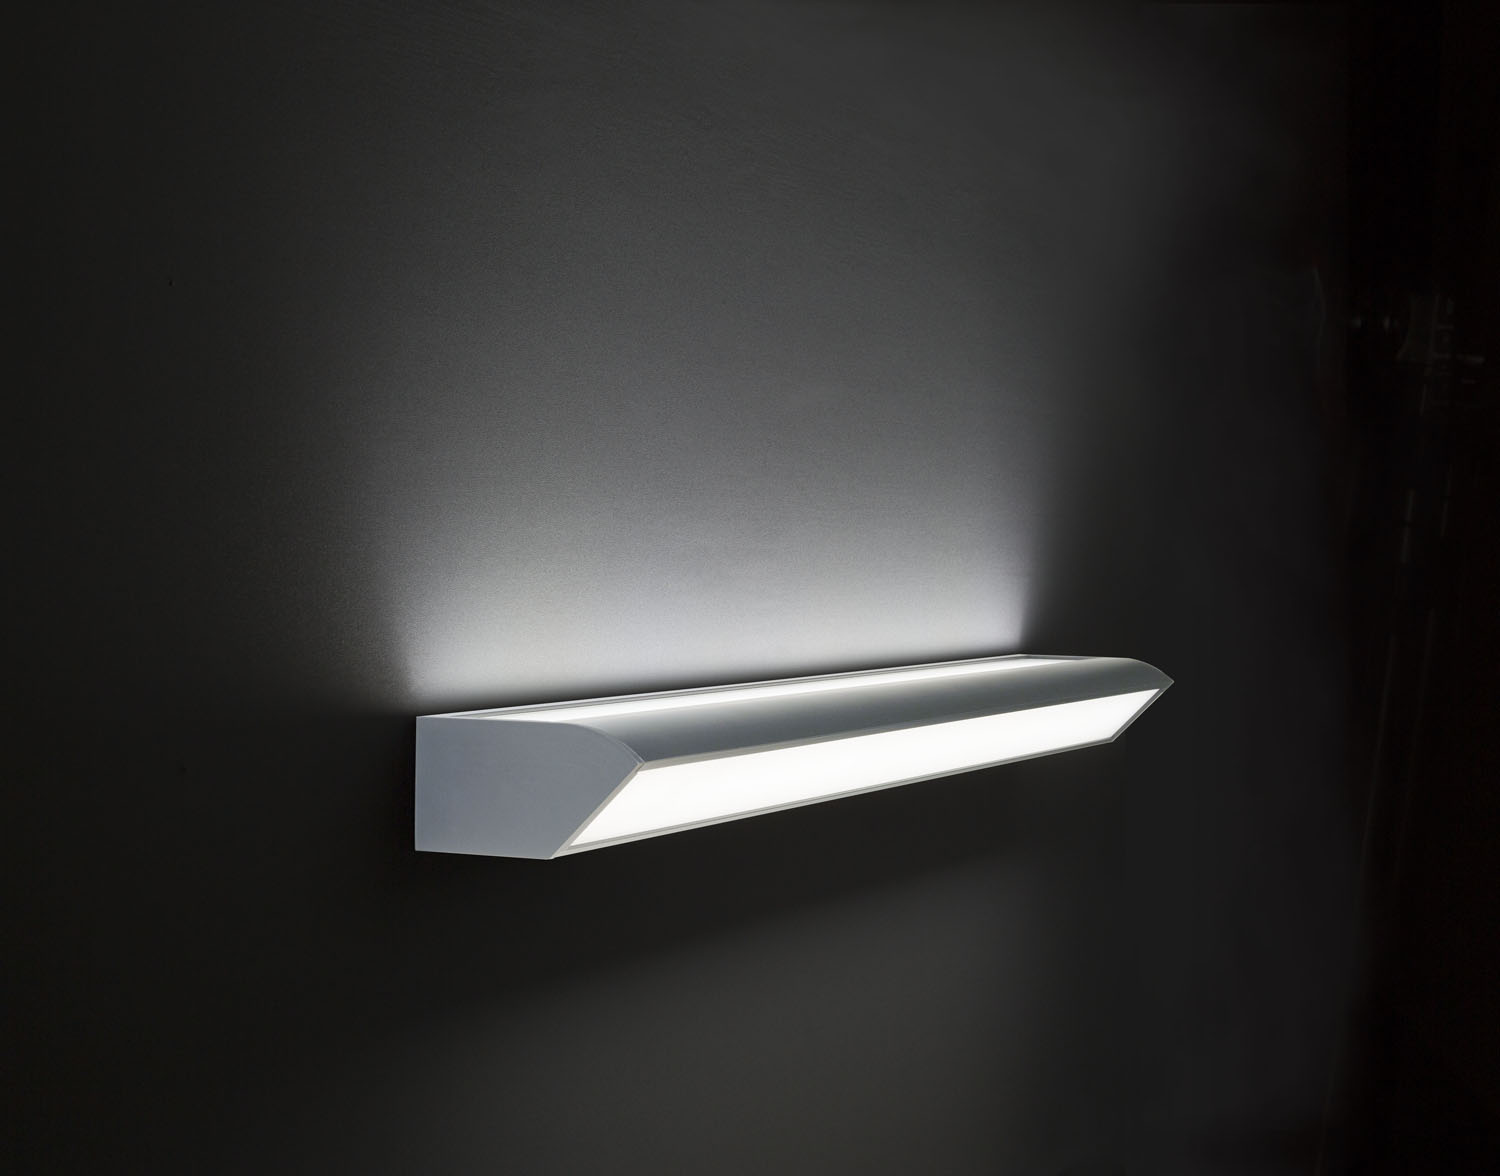 LED-121-WALL only down light,  modern design, for hospital and architectural use.High lumen, strobeless,glare free